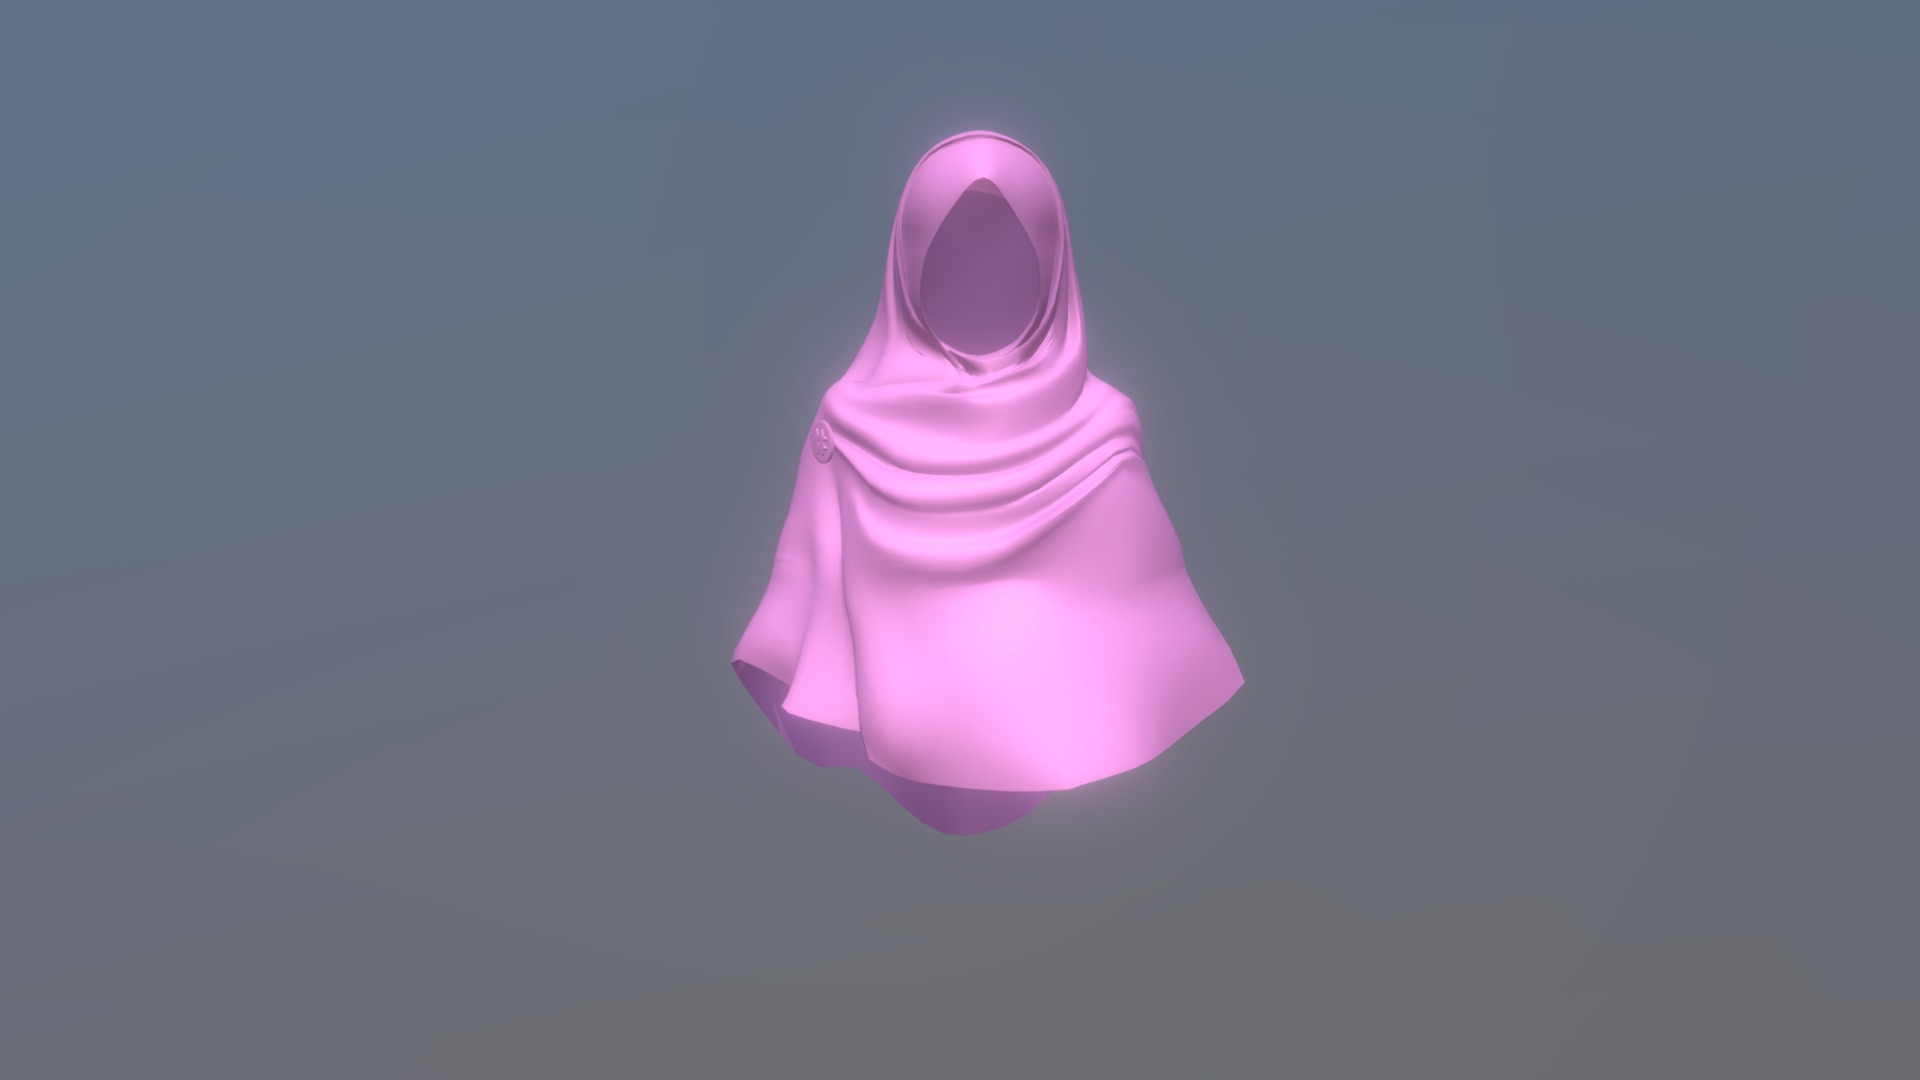 3D model Hijab Model 1 - This is a 3D model of the Hijab Model 1. The 3D model is about a pink plastic toy.